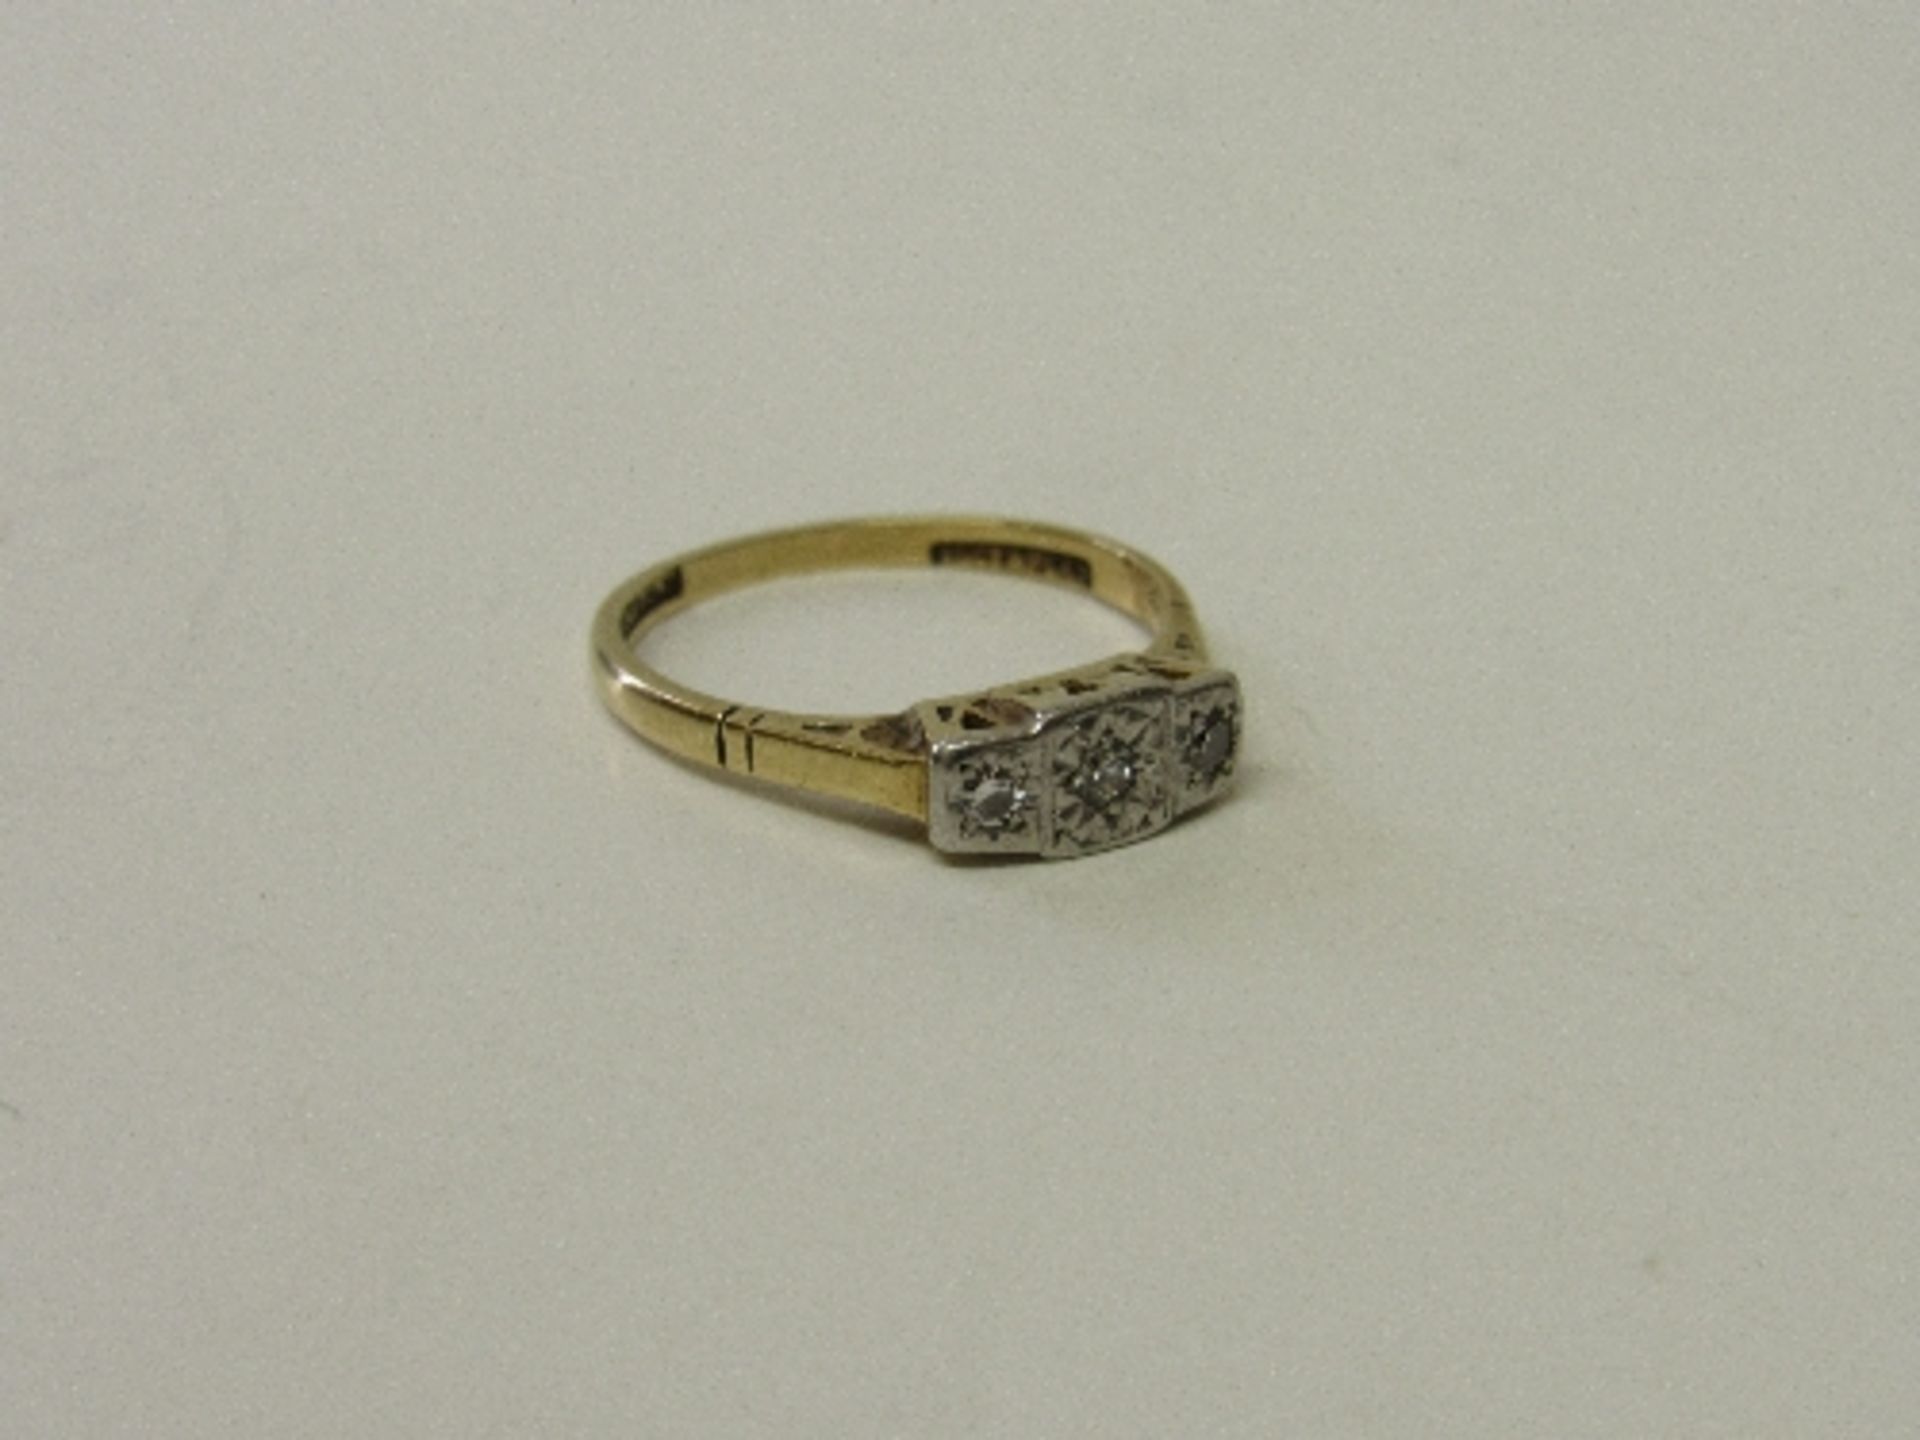 18ct gold and platinum diamond ring size N wt 3.2g. Estimate £100-120